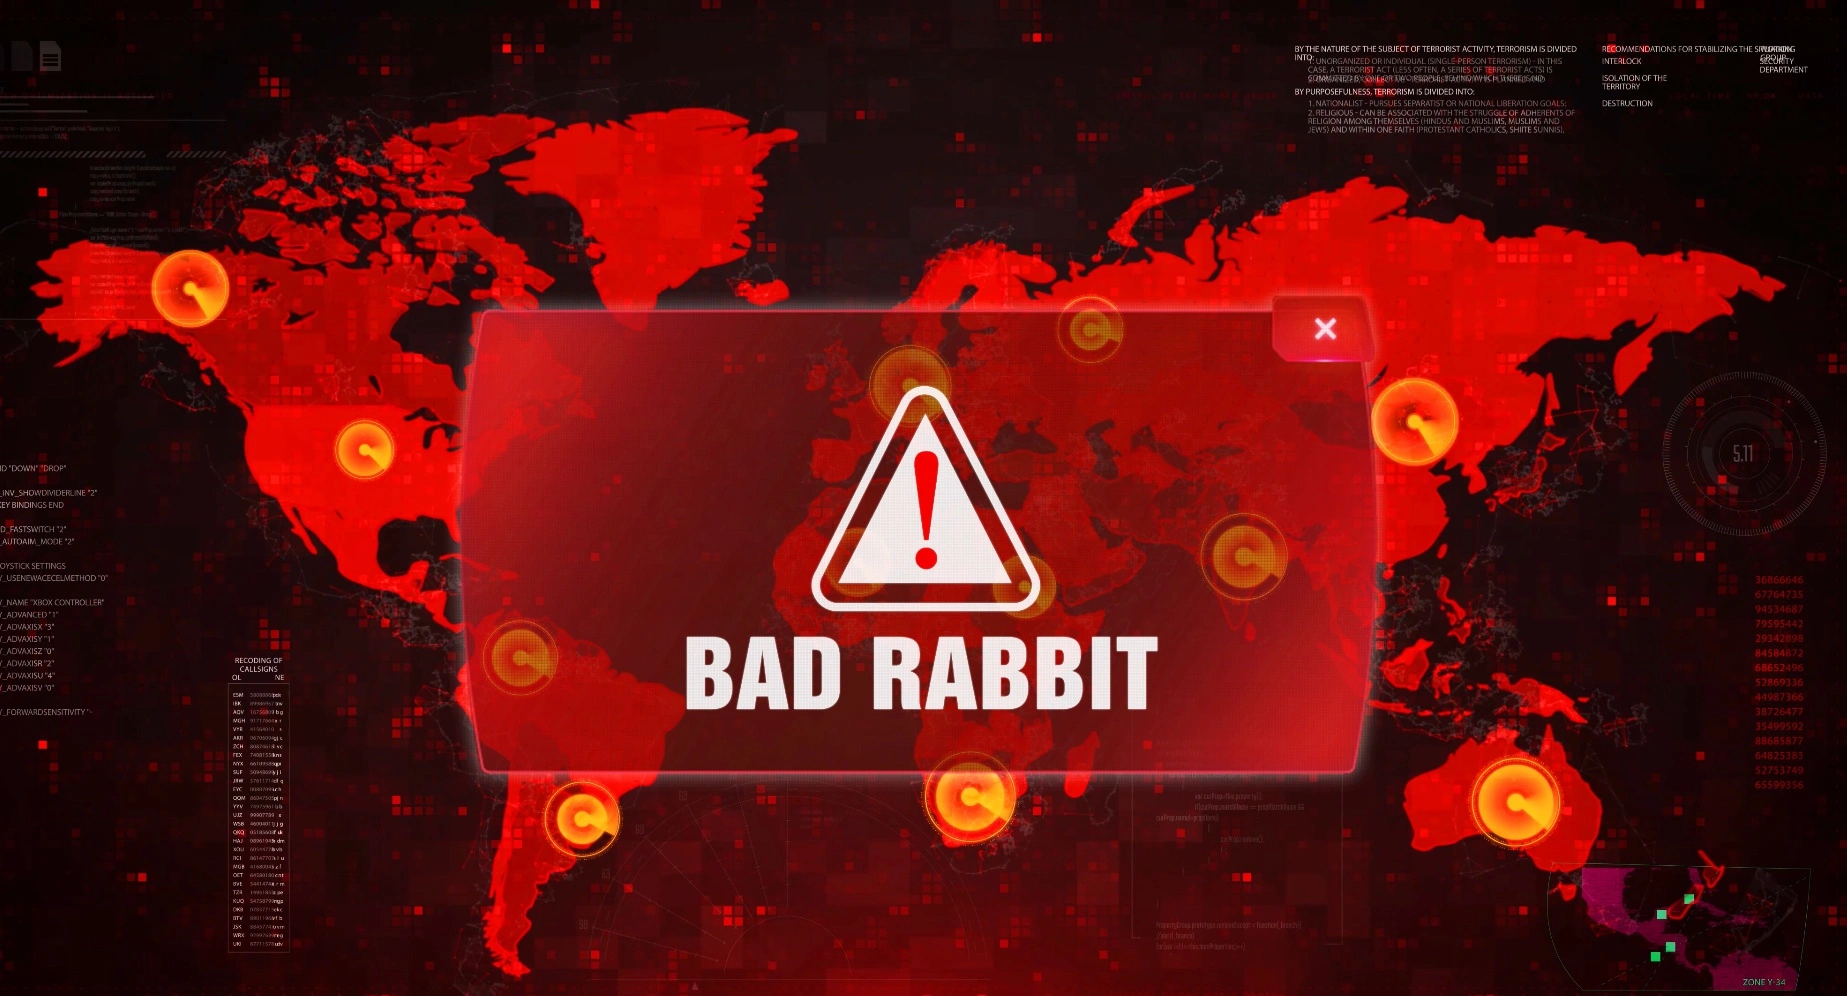 type of ransomware attack - Bad Rabbit